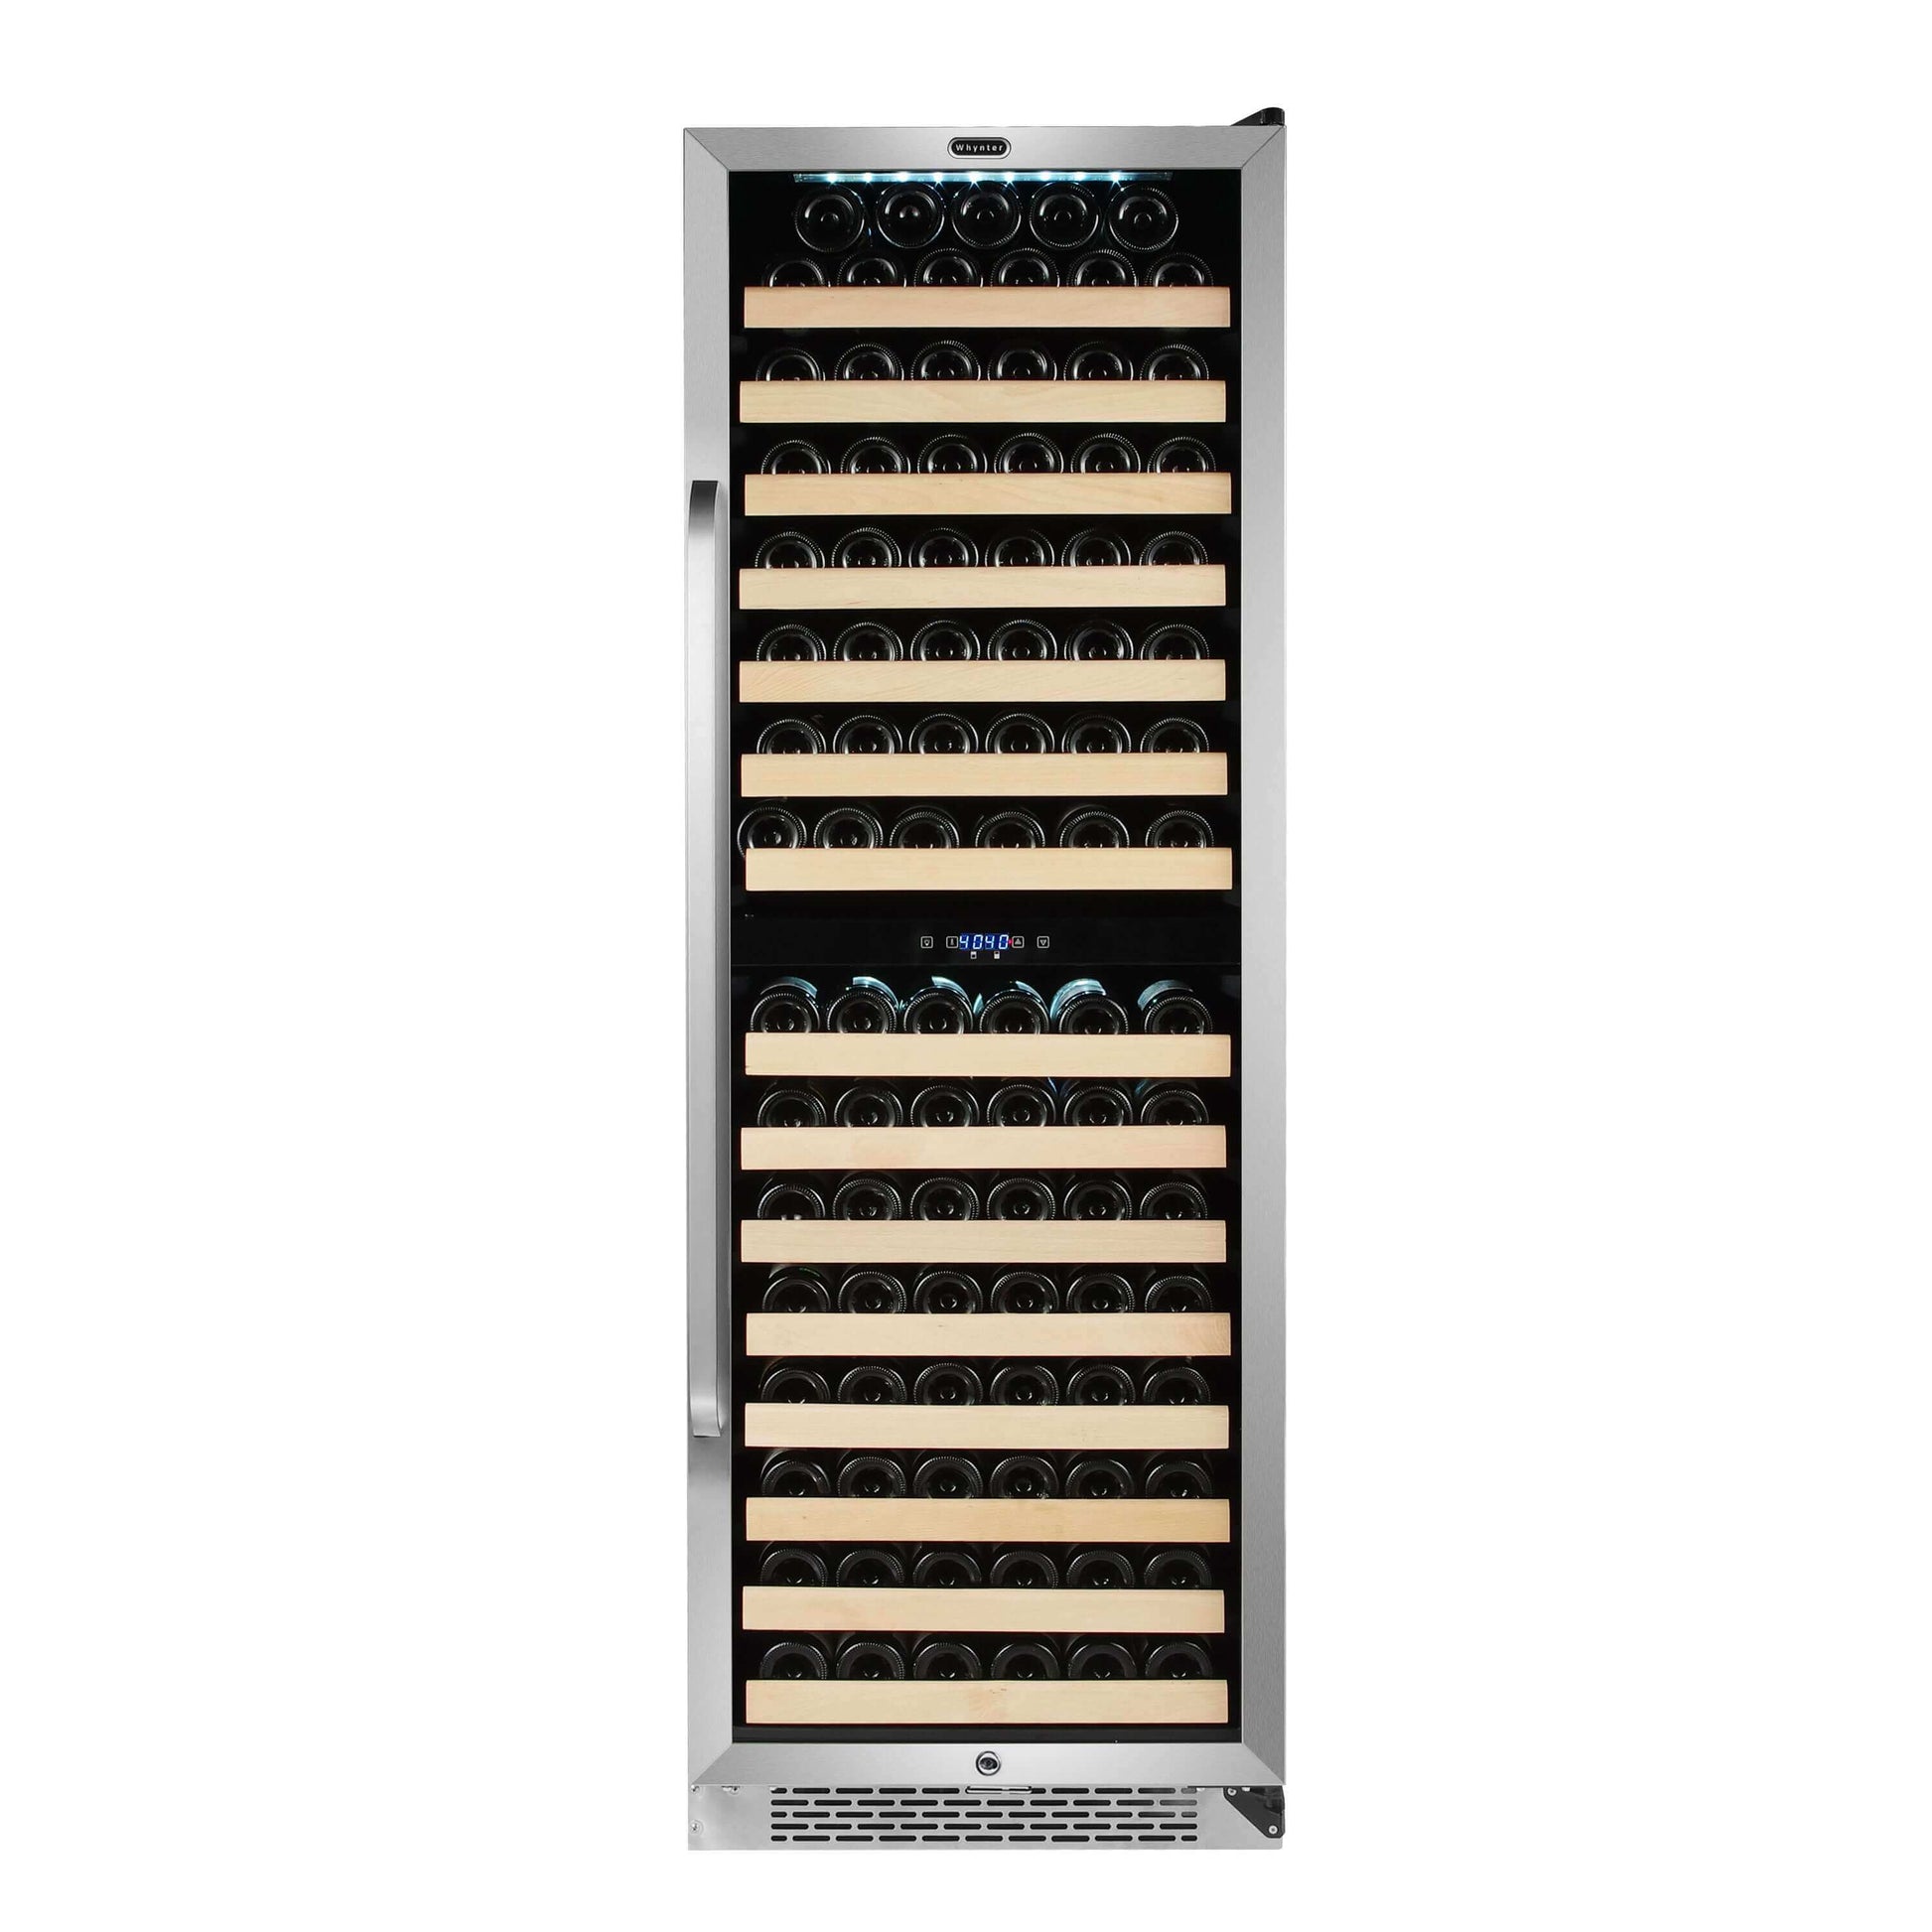 Whynter BWR-1642DZ/BWR-1642DZa 164 Bottle Built-in Stainless Steel Dual Zone Compressor Wine Refrigerator with Display Rack and LED display